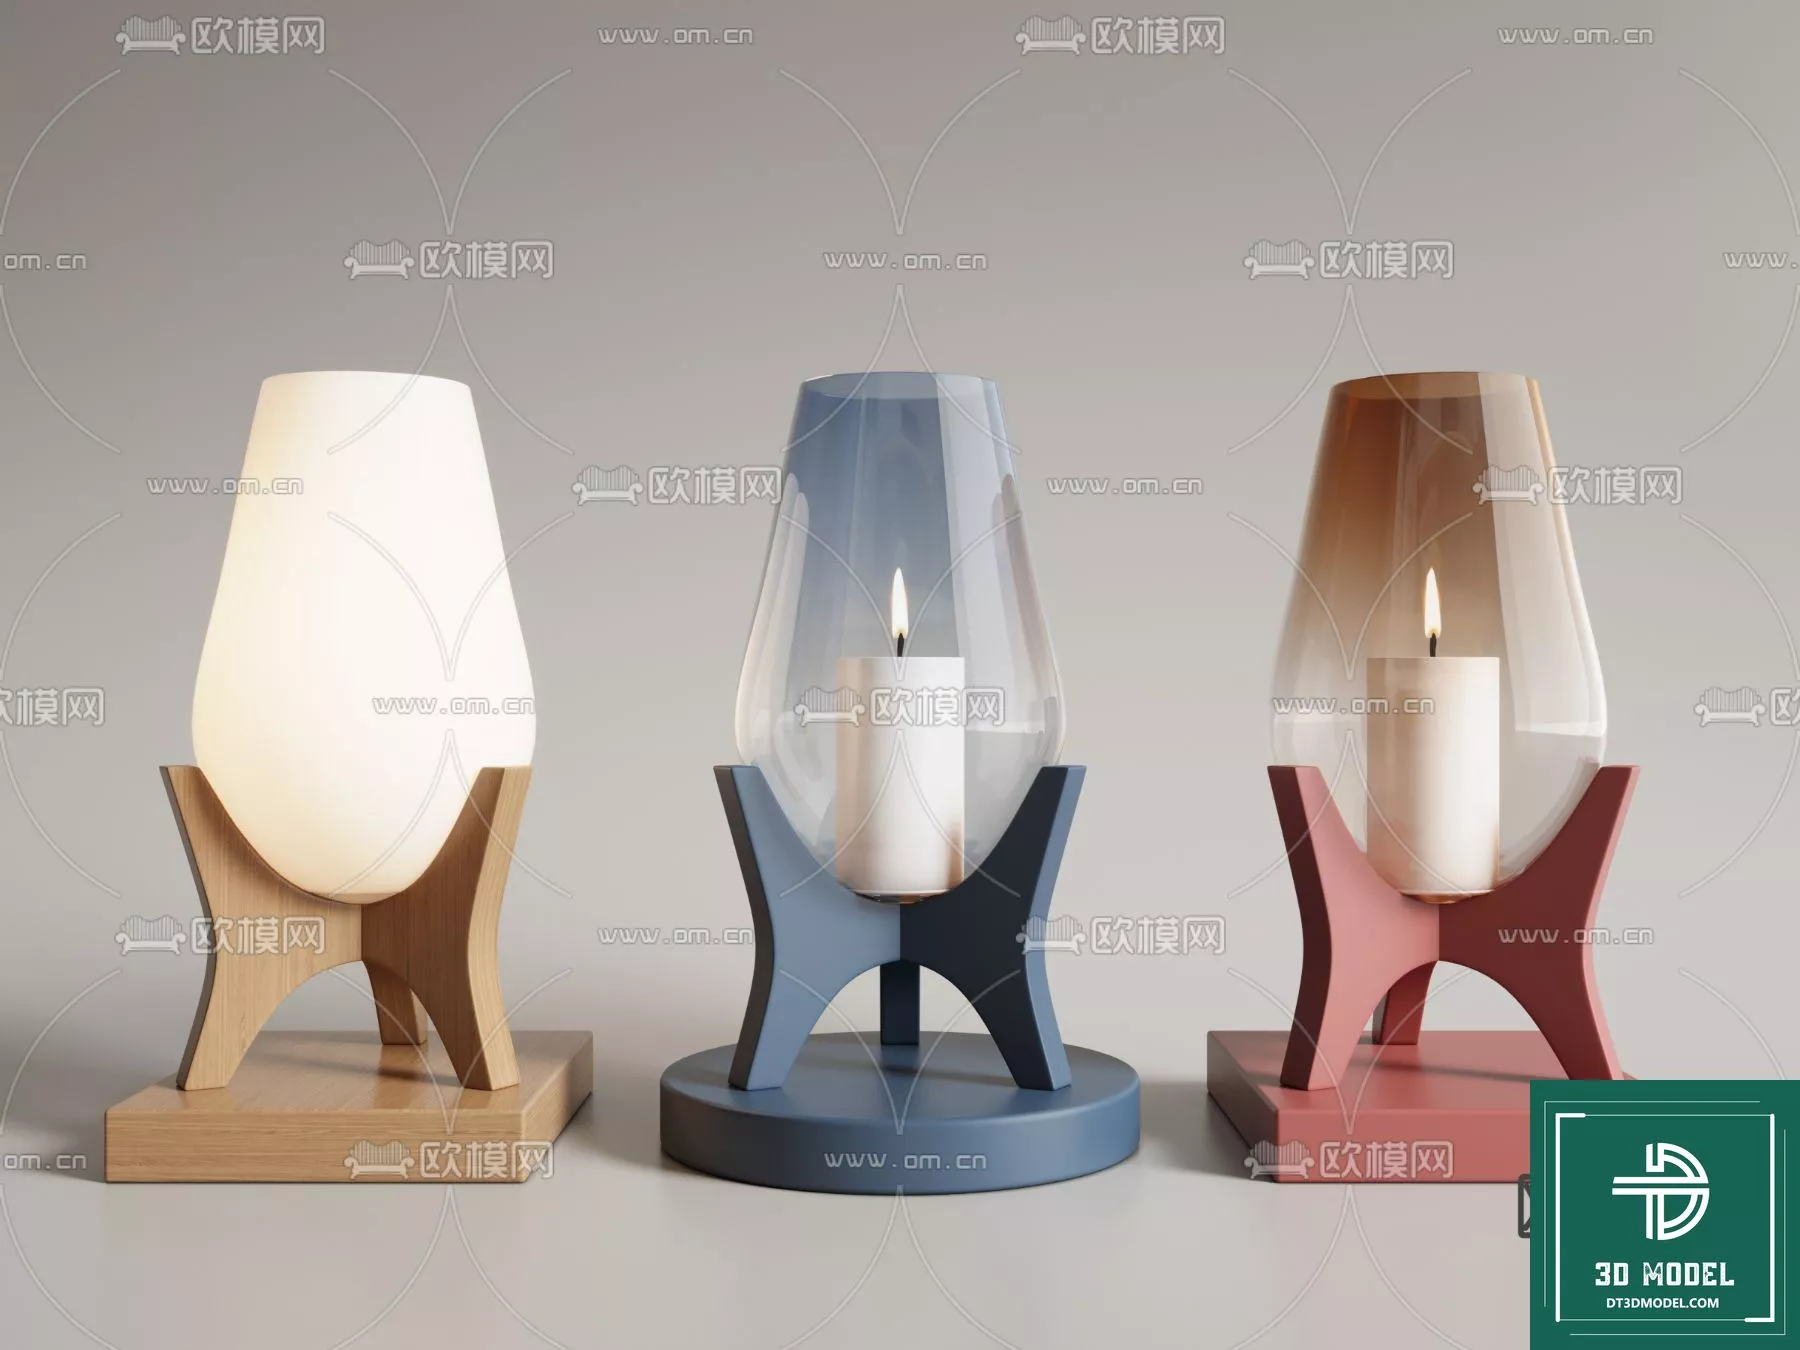 MODERN TABLE LAMP - SKETCHUP 3D MODEL - VRAY OR ENSCAPE - ID14646